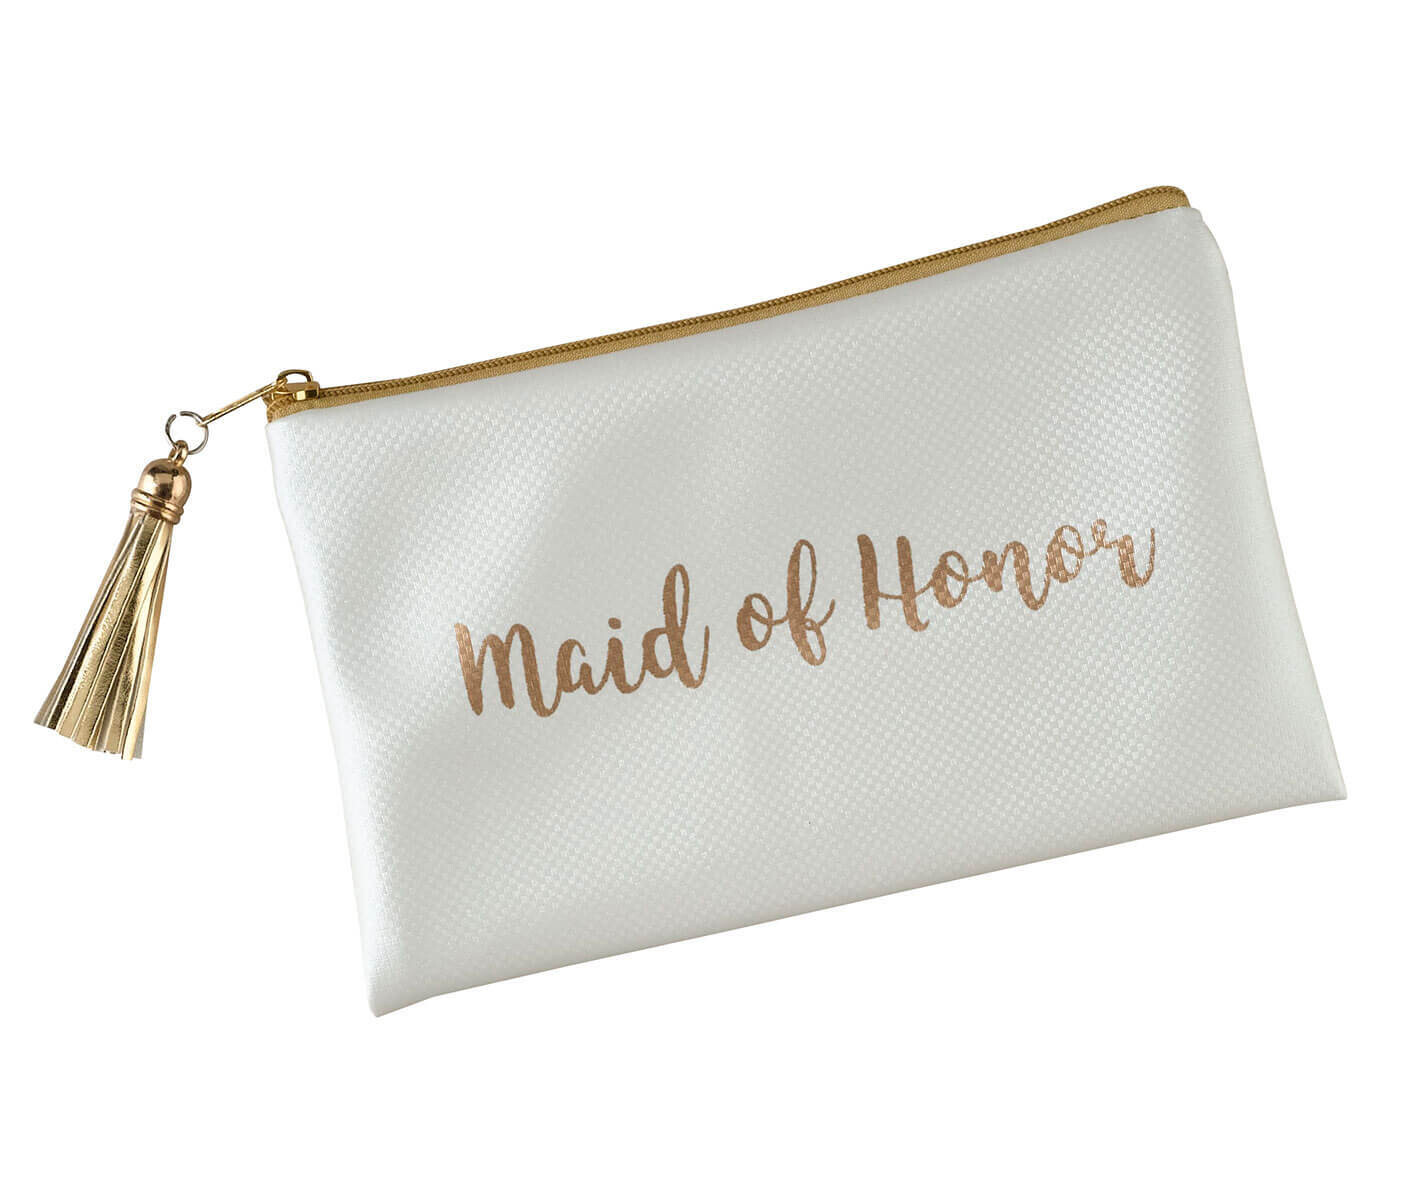 Maid of Honor Survival Cosmetic Bag+